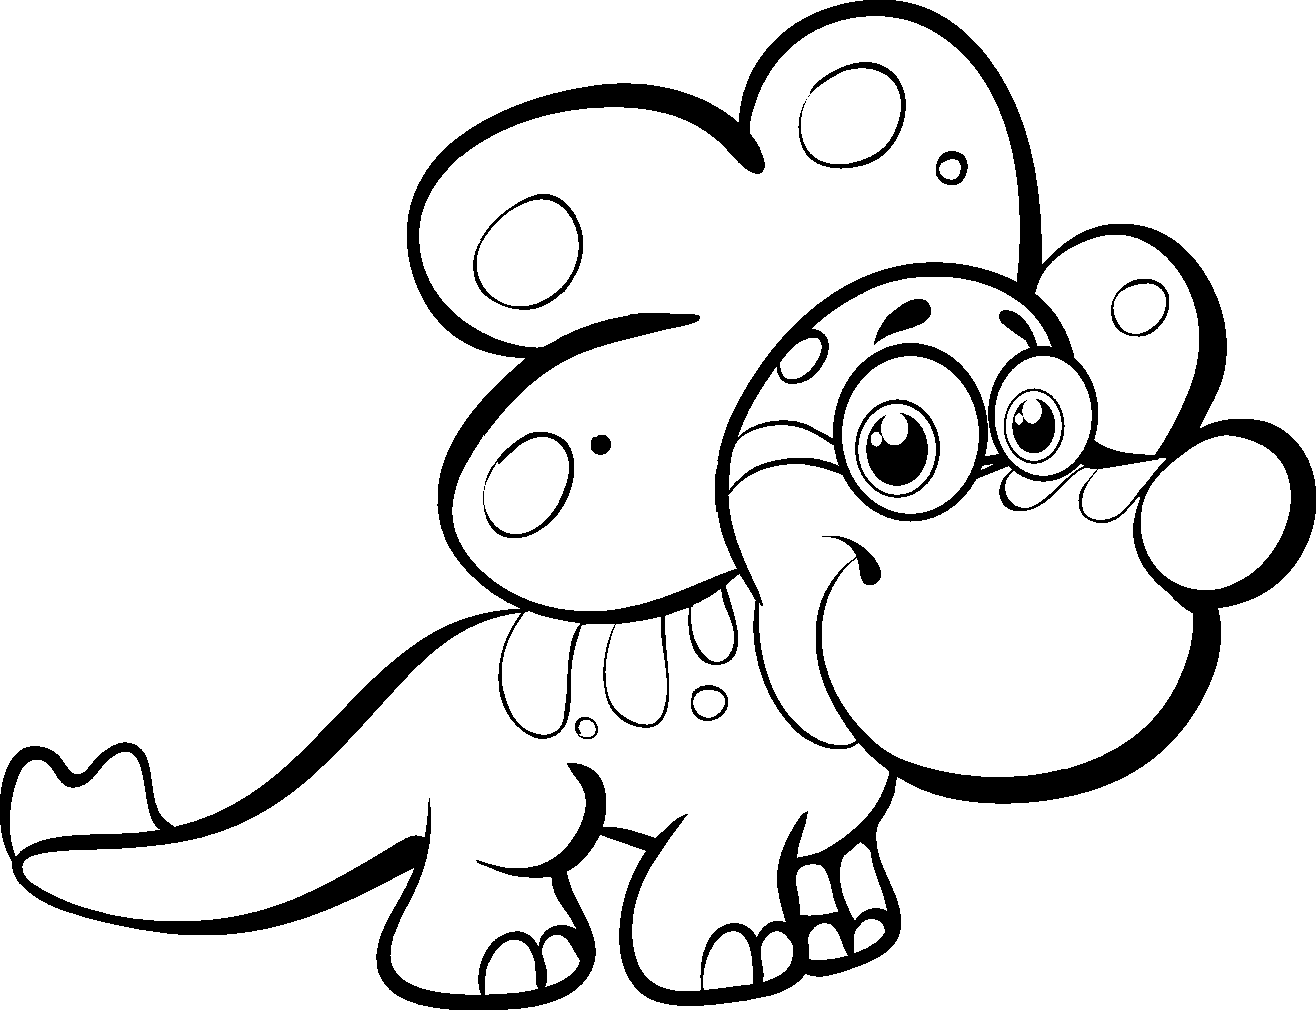 Cartoon Dinosaurs - Coloring Pages for Kids and for Adults